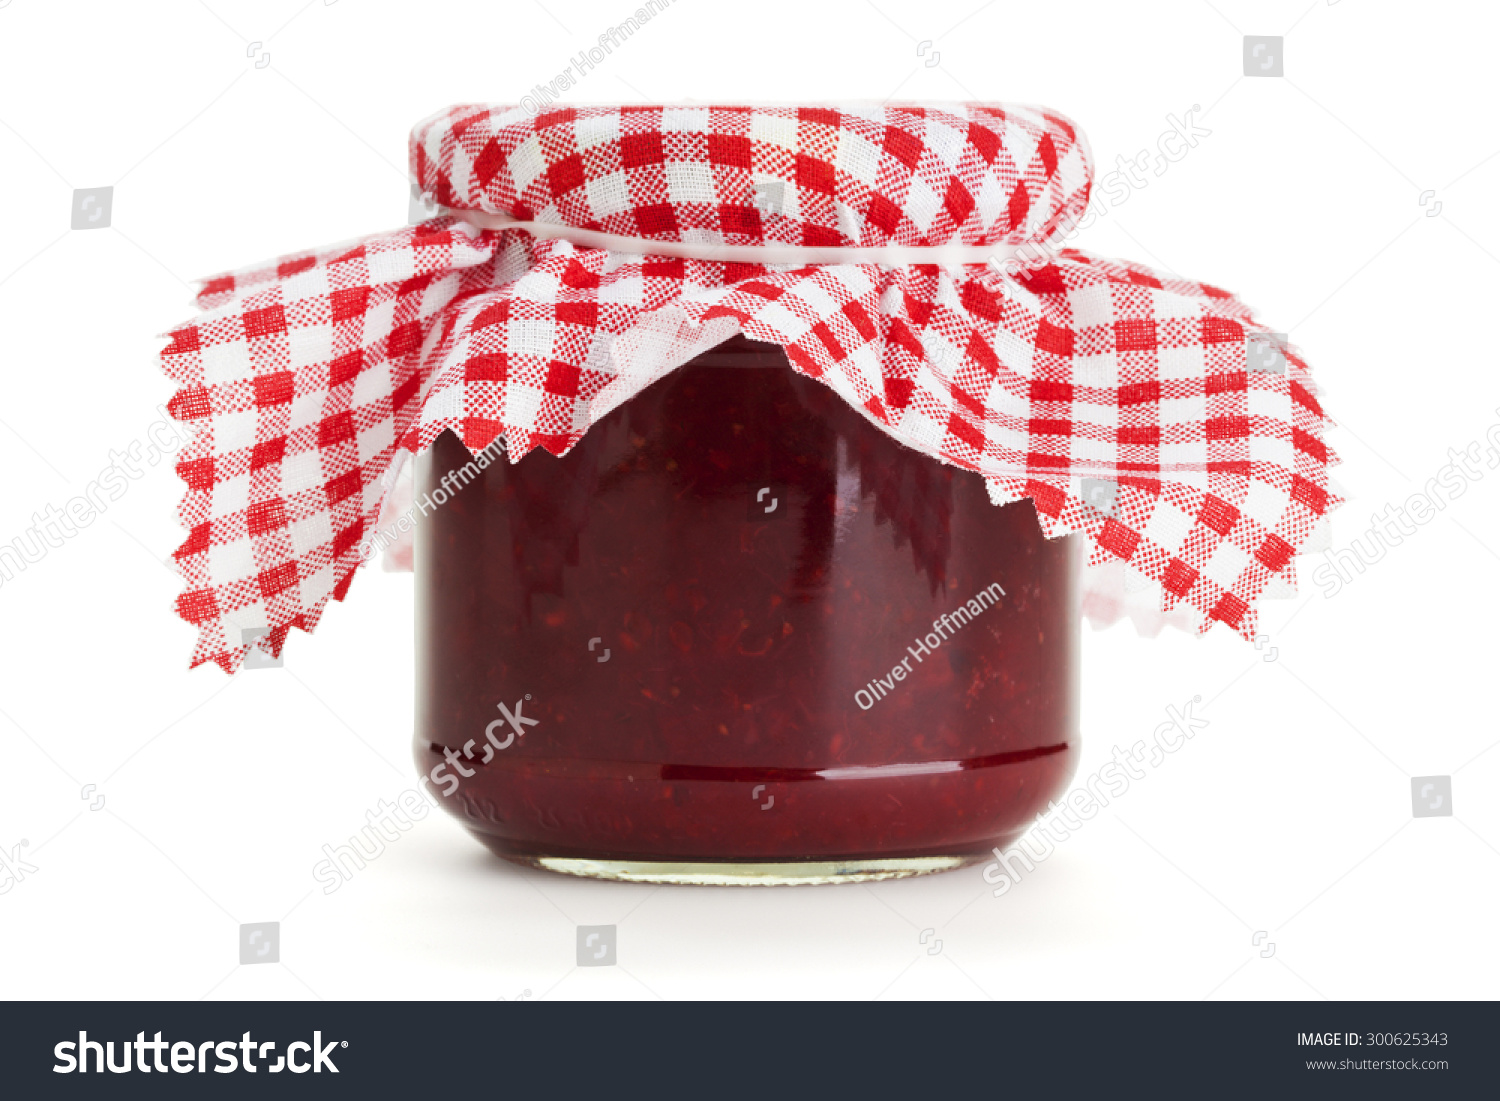 Download Jar Red Jam Checkered Cloth On Stock Photo Edit Now 300625343 PSD Mockup Templates